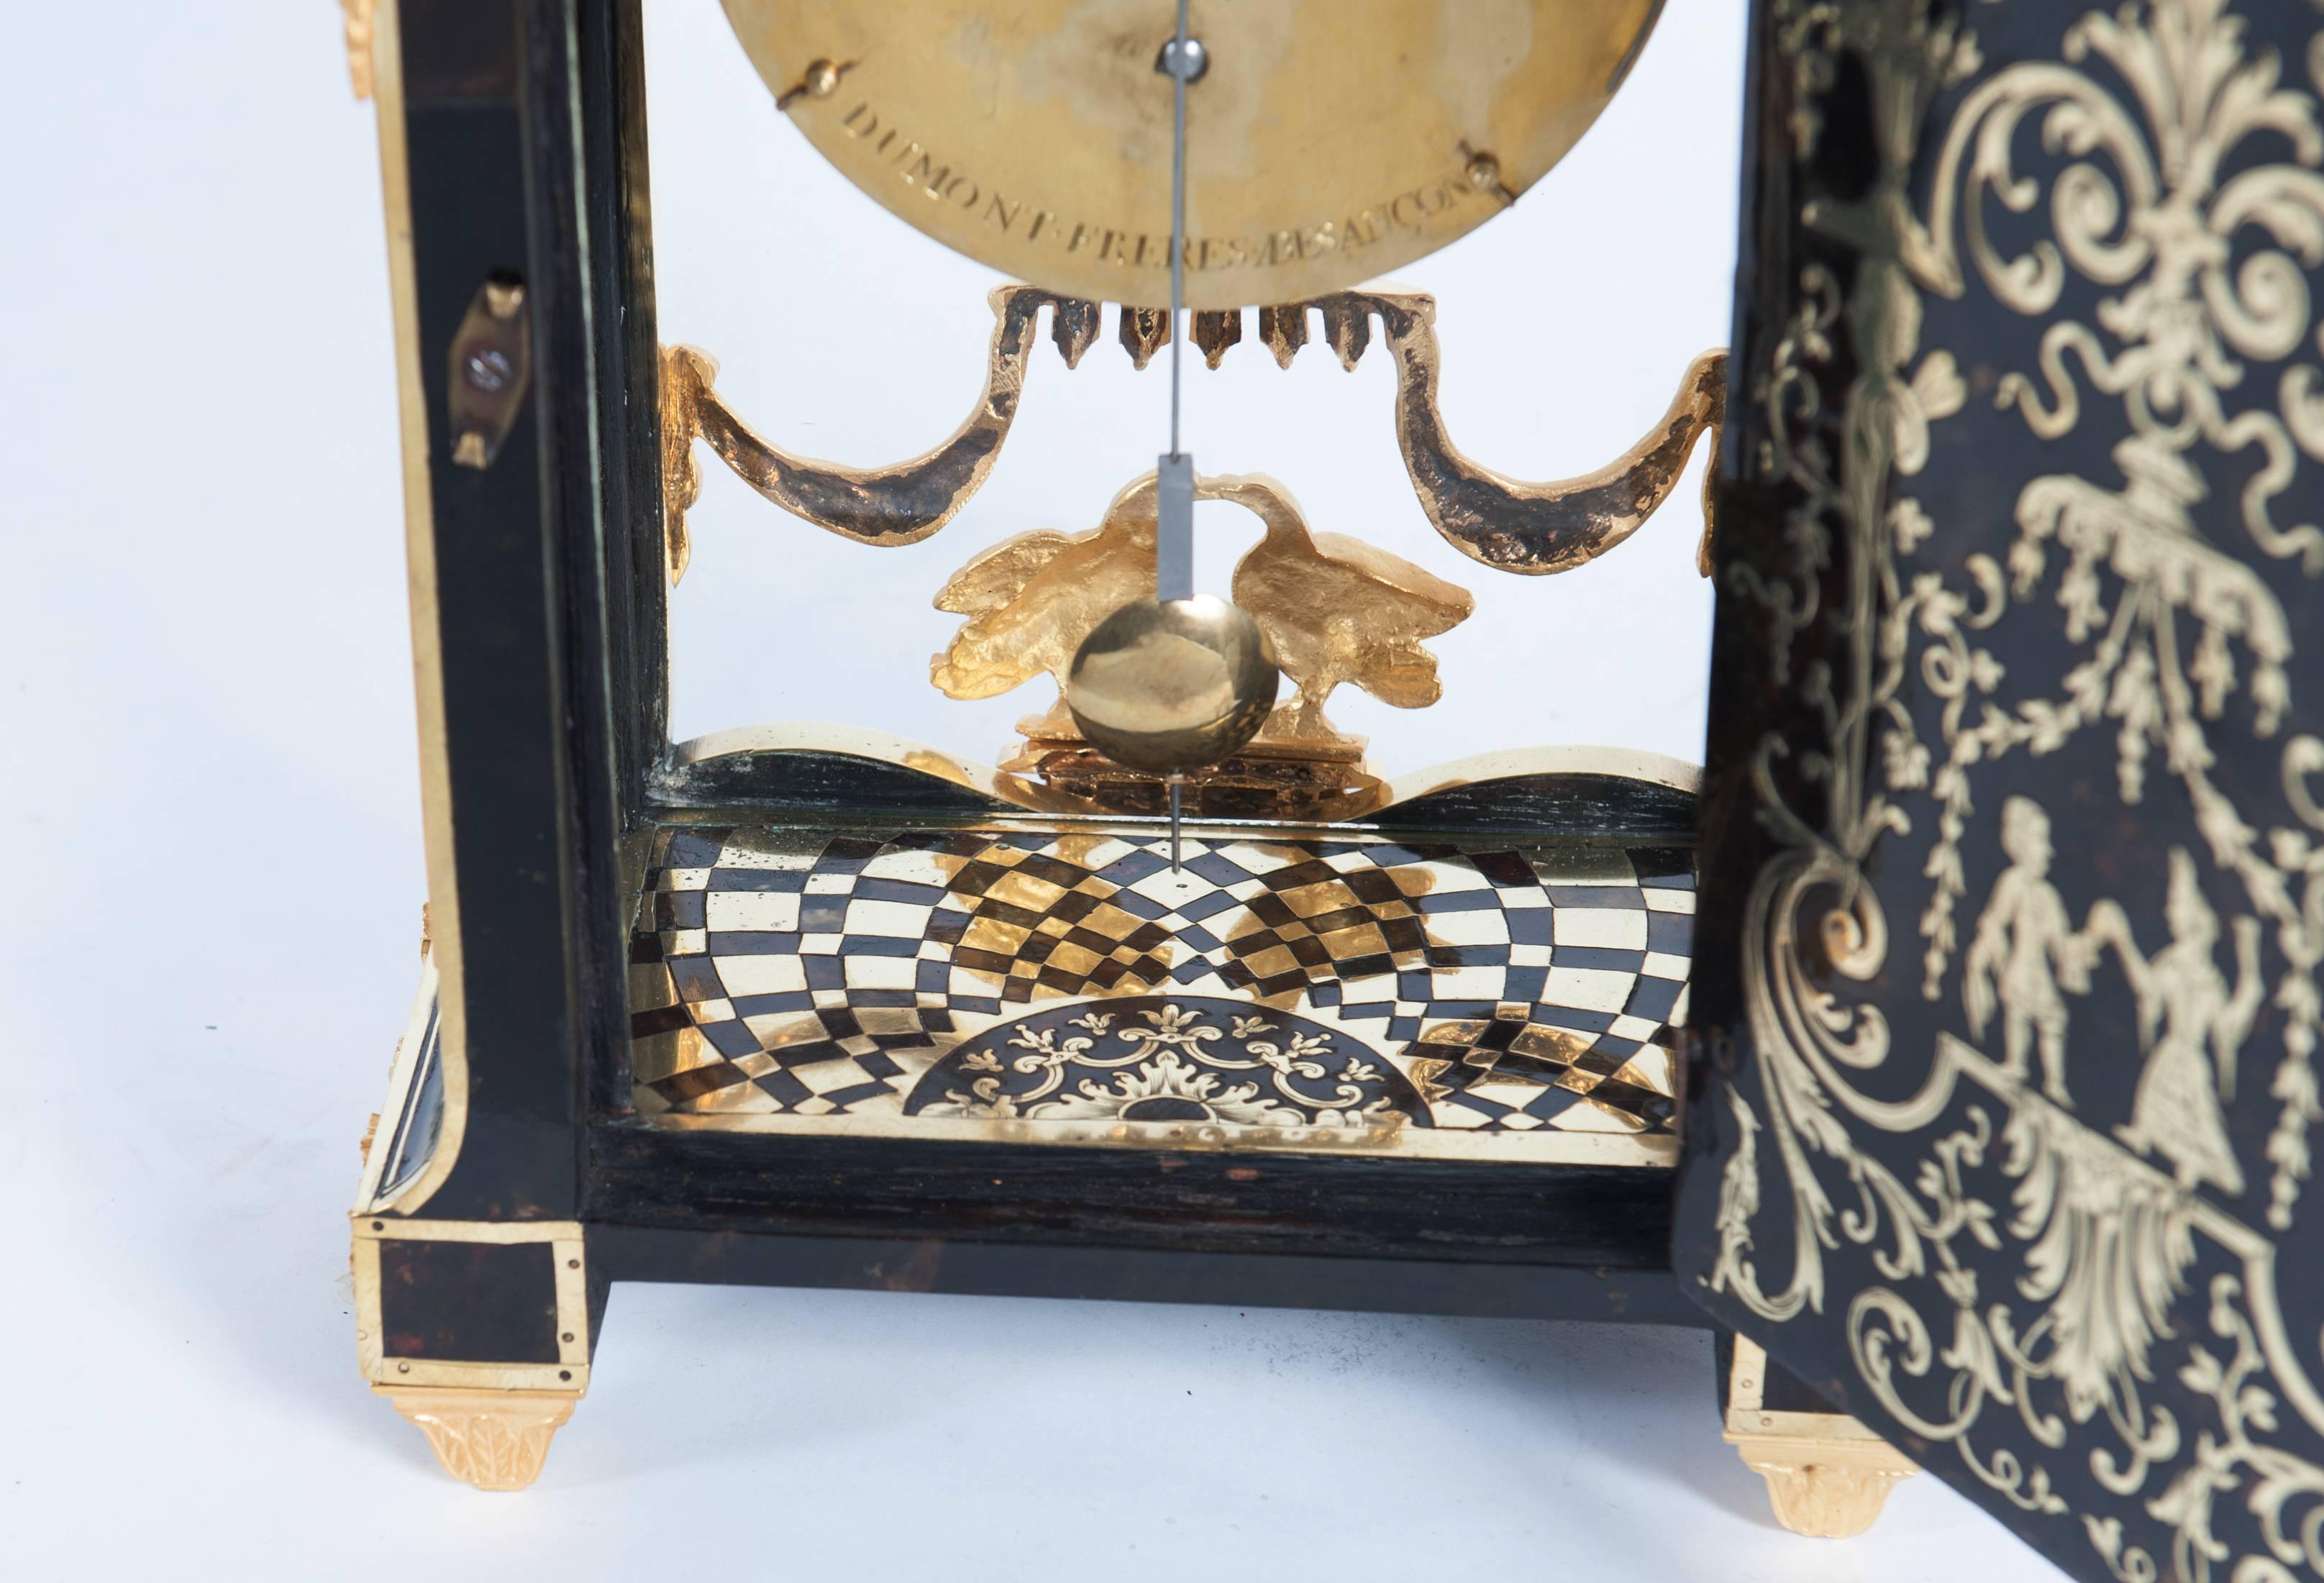 Small Decorative Louis XIV Boulle Inlaid Bracket Clock, circa 1720 In Good Condition For Sale In Amsterdam, Noord Holland